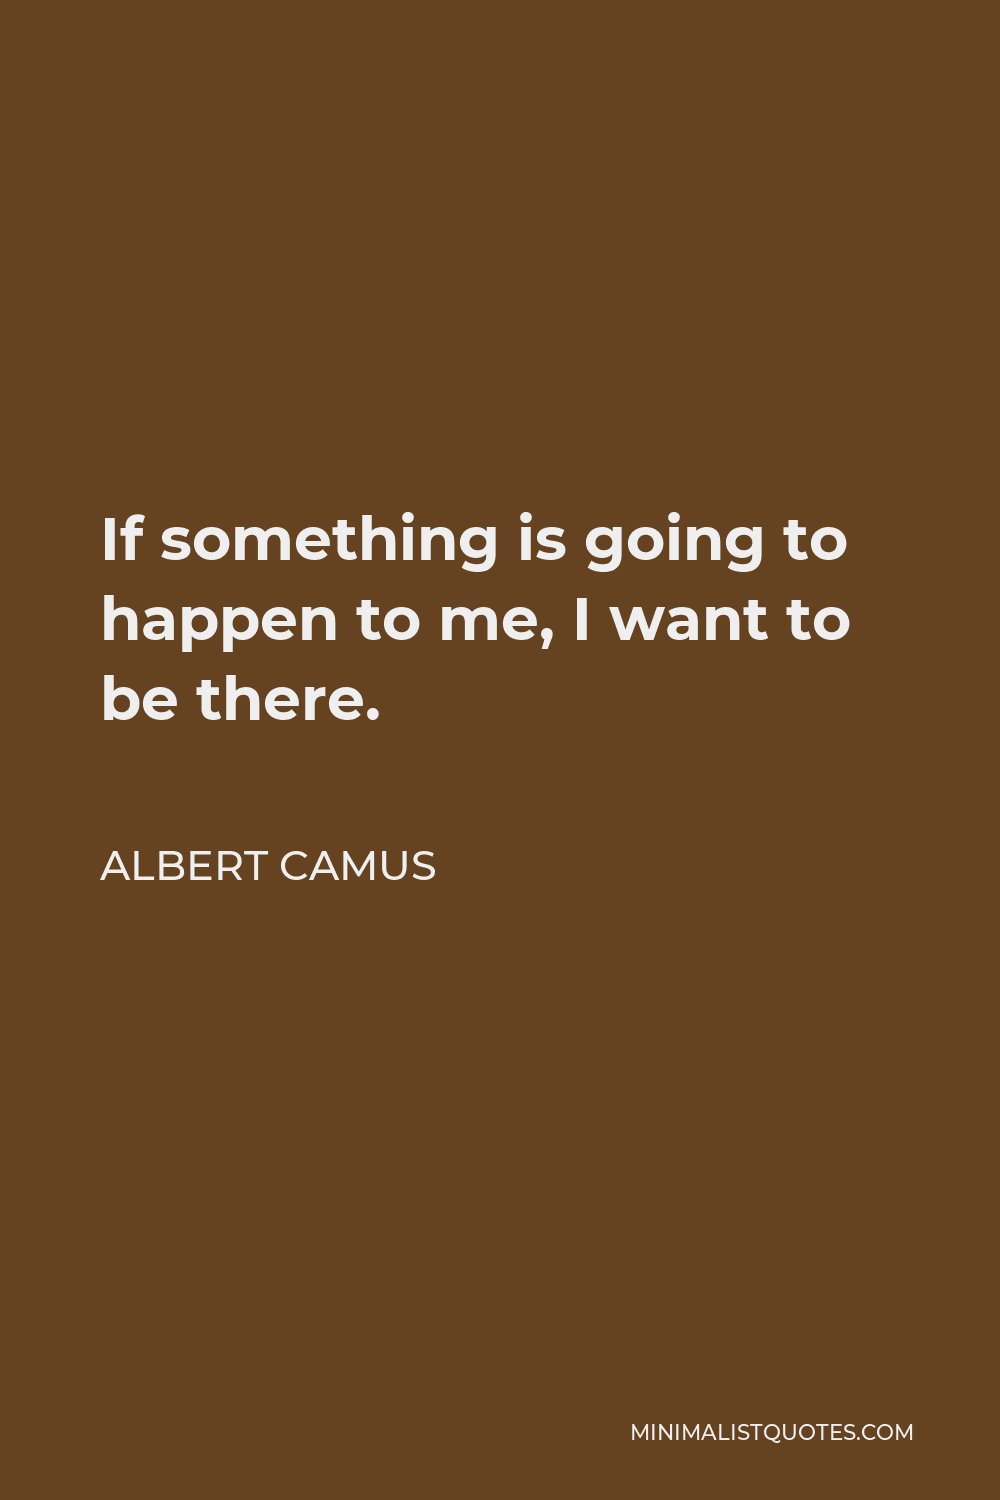 Albert Camus Quote - If something is going to happen to me, I want to be there.